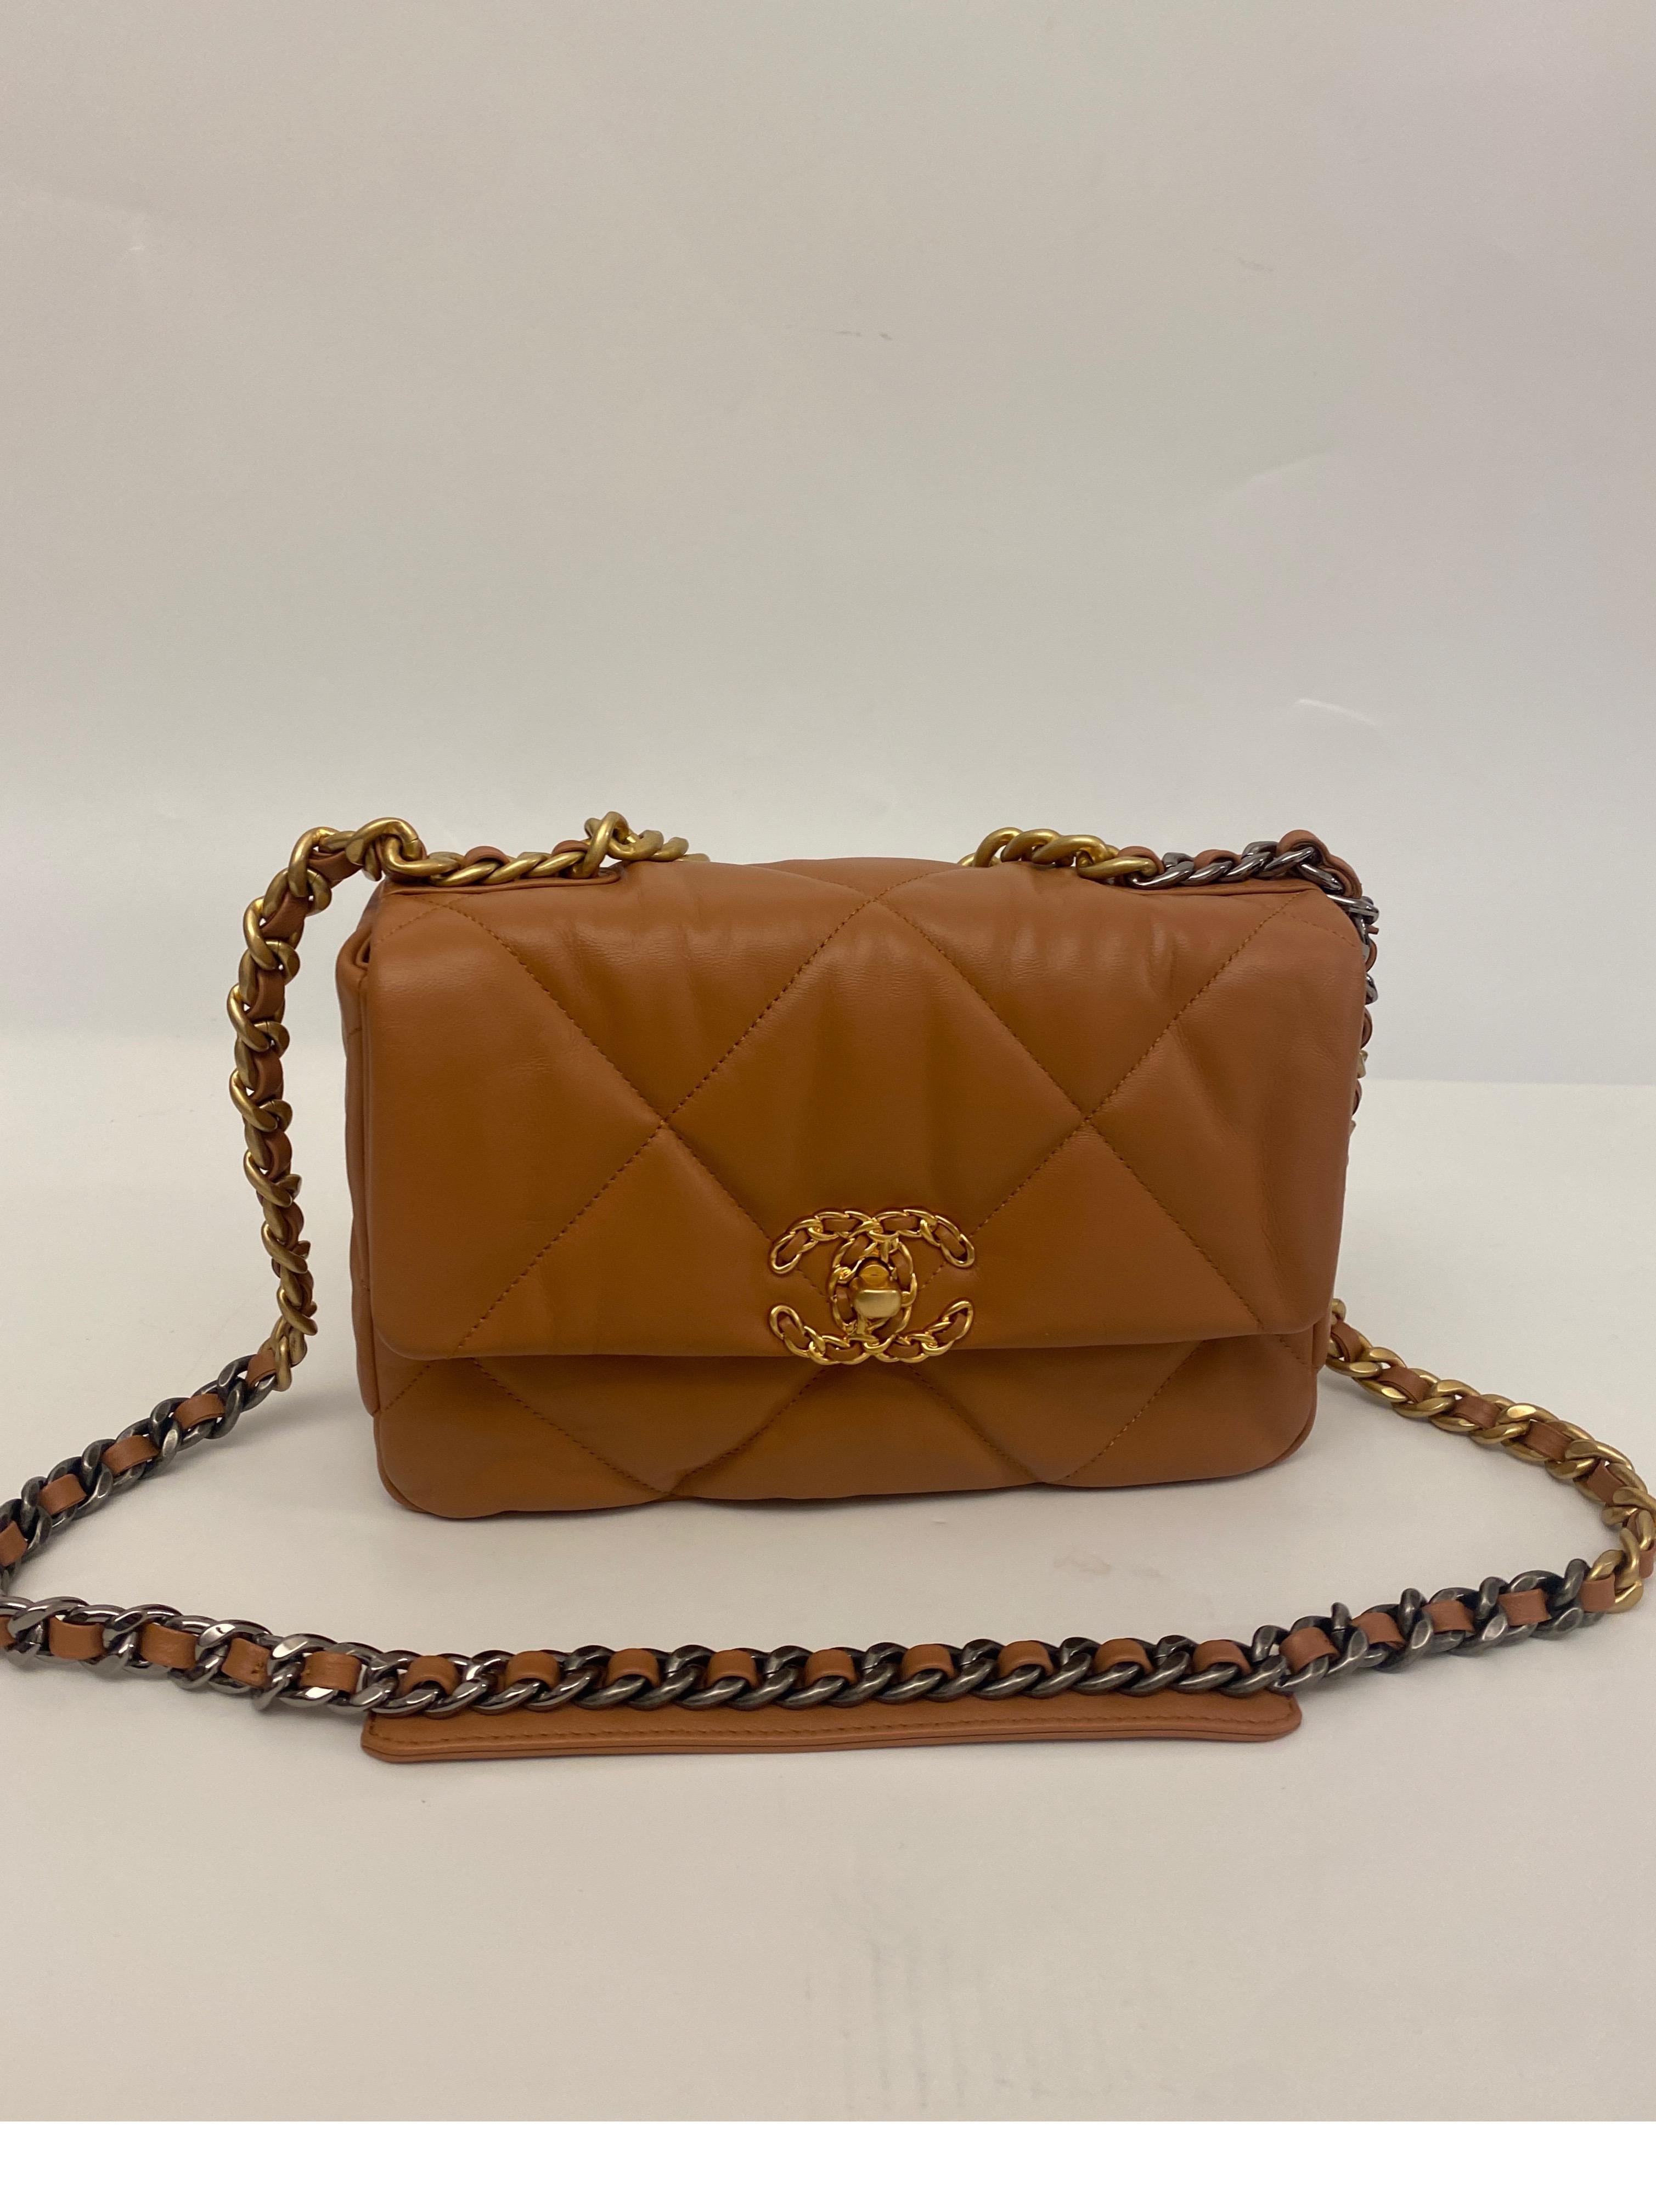 Classic Chanel Caramel 19 flap bag for 1st Dibs Roselle bag 

Comes with Duster bag 
Serial Number 30425943 with card 
Pristine condition 9.9 out of 10 condition 
Stored in Closet 
Made in Italy 
Special order for 1st dibs client and source 
Final